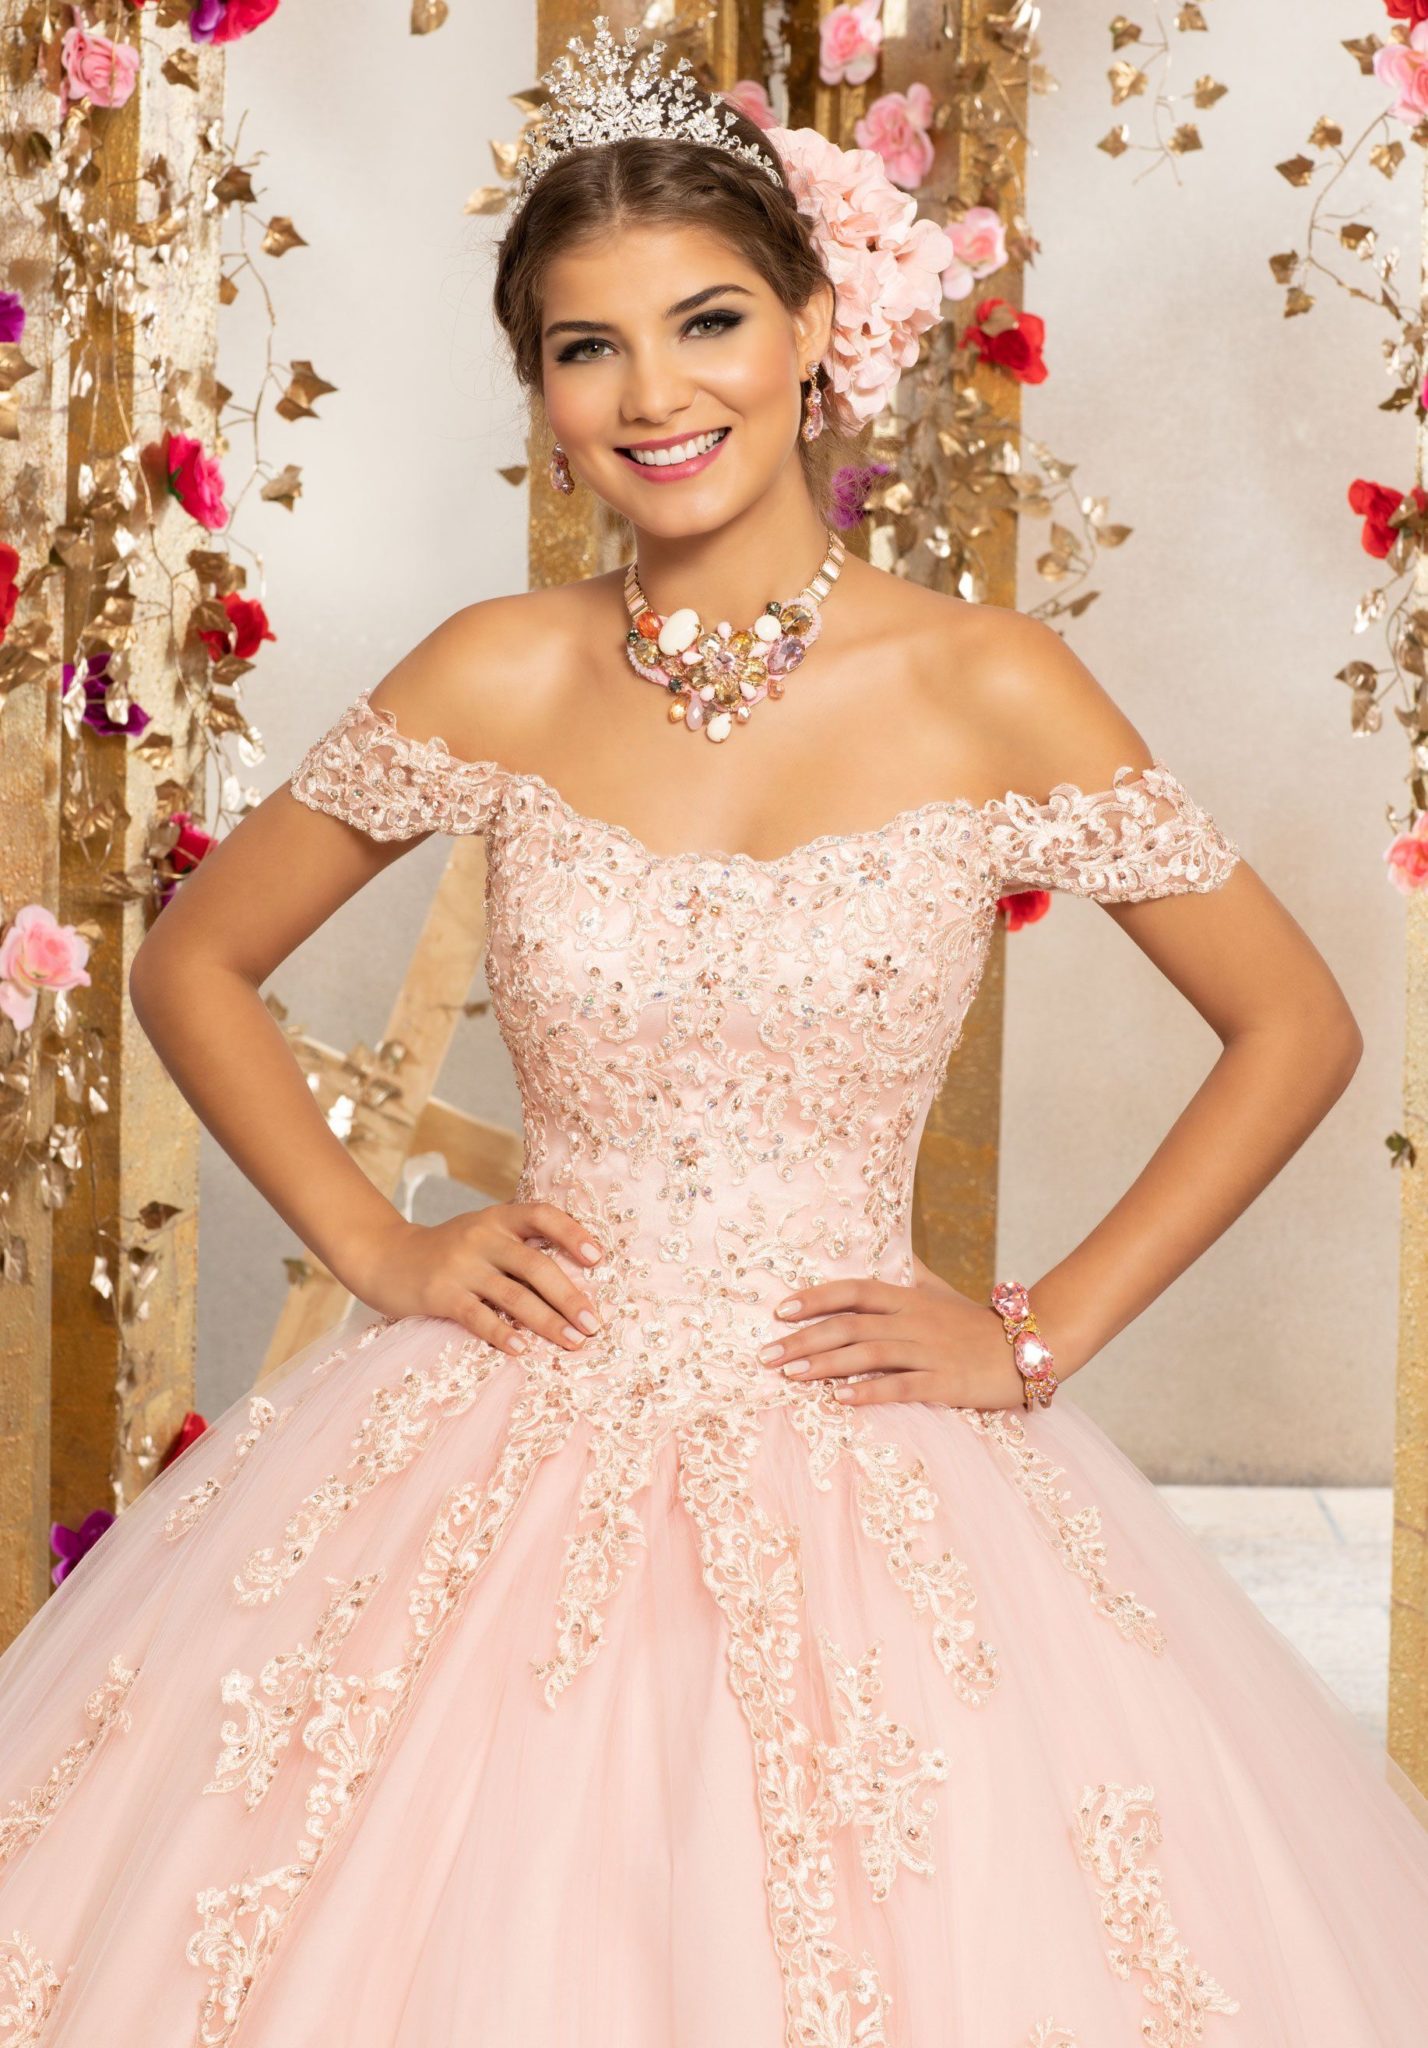 Absolutely Stunning Quinceanera Dresses Ideas